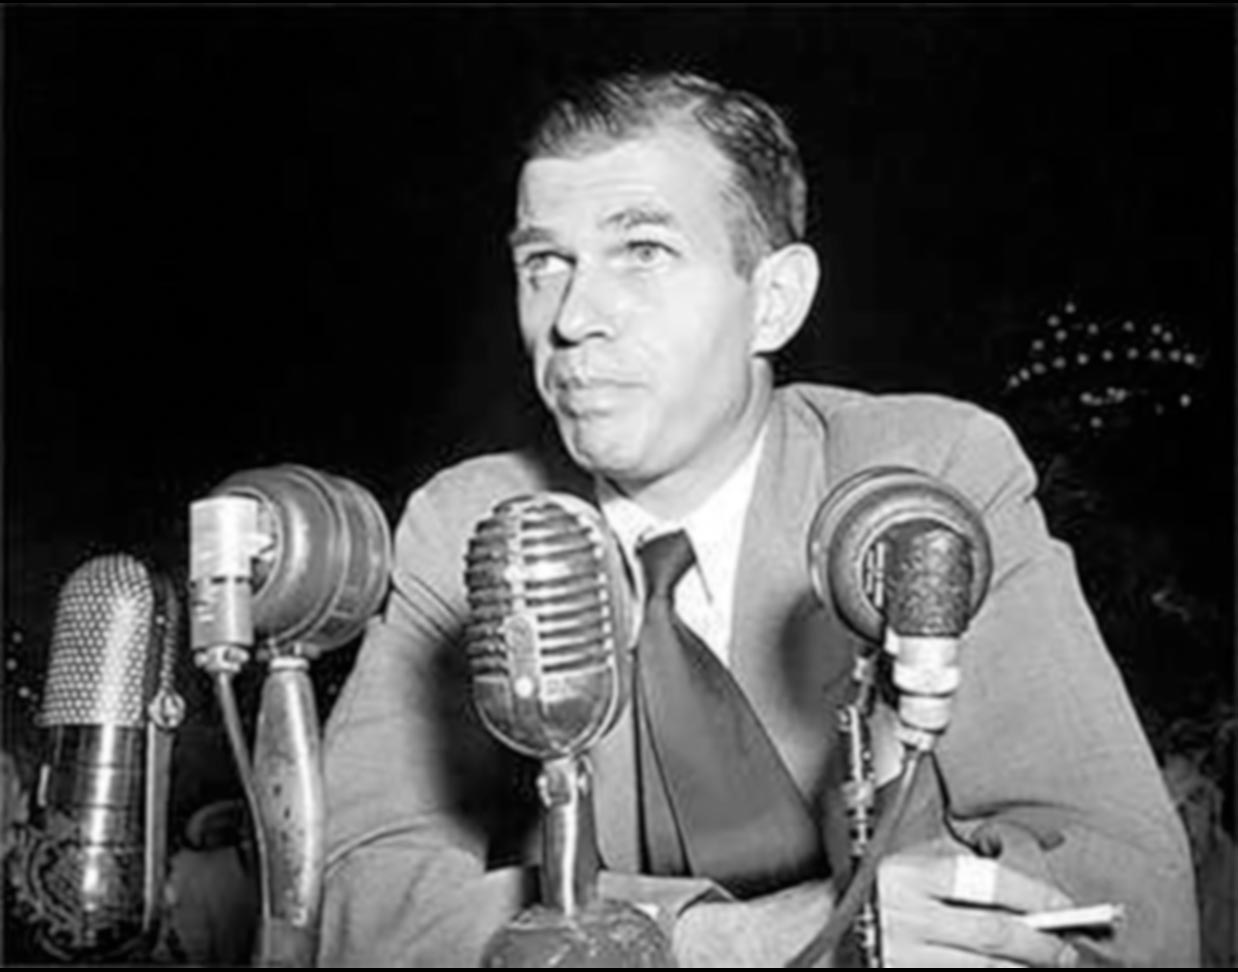 Alger Hiss was an American government official accused and convicted of spying for the Soviet Union in the Cold War Era